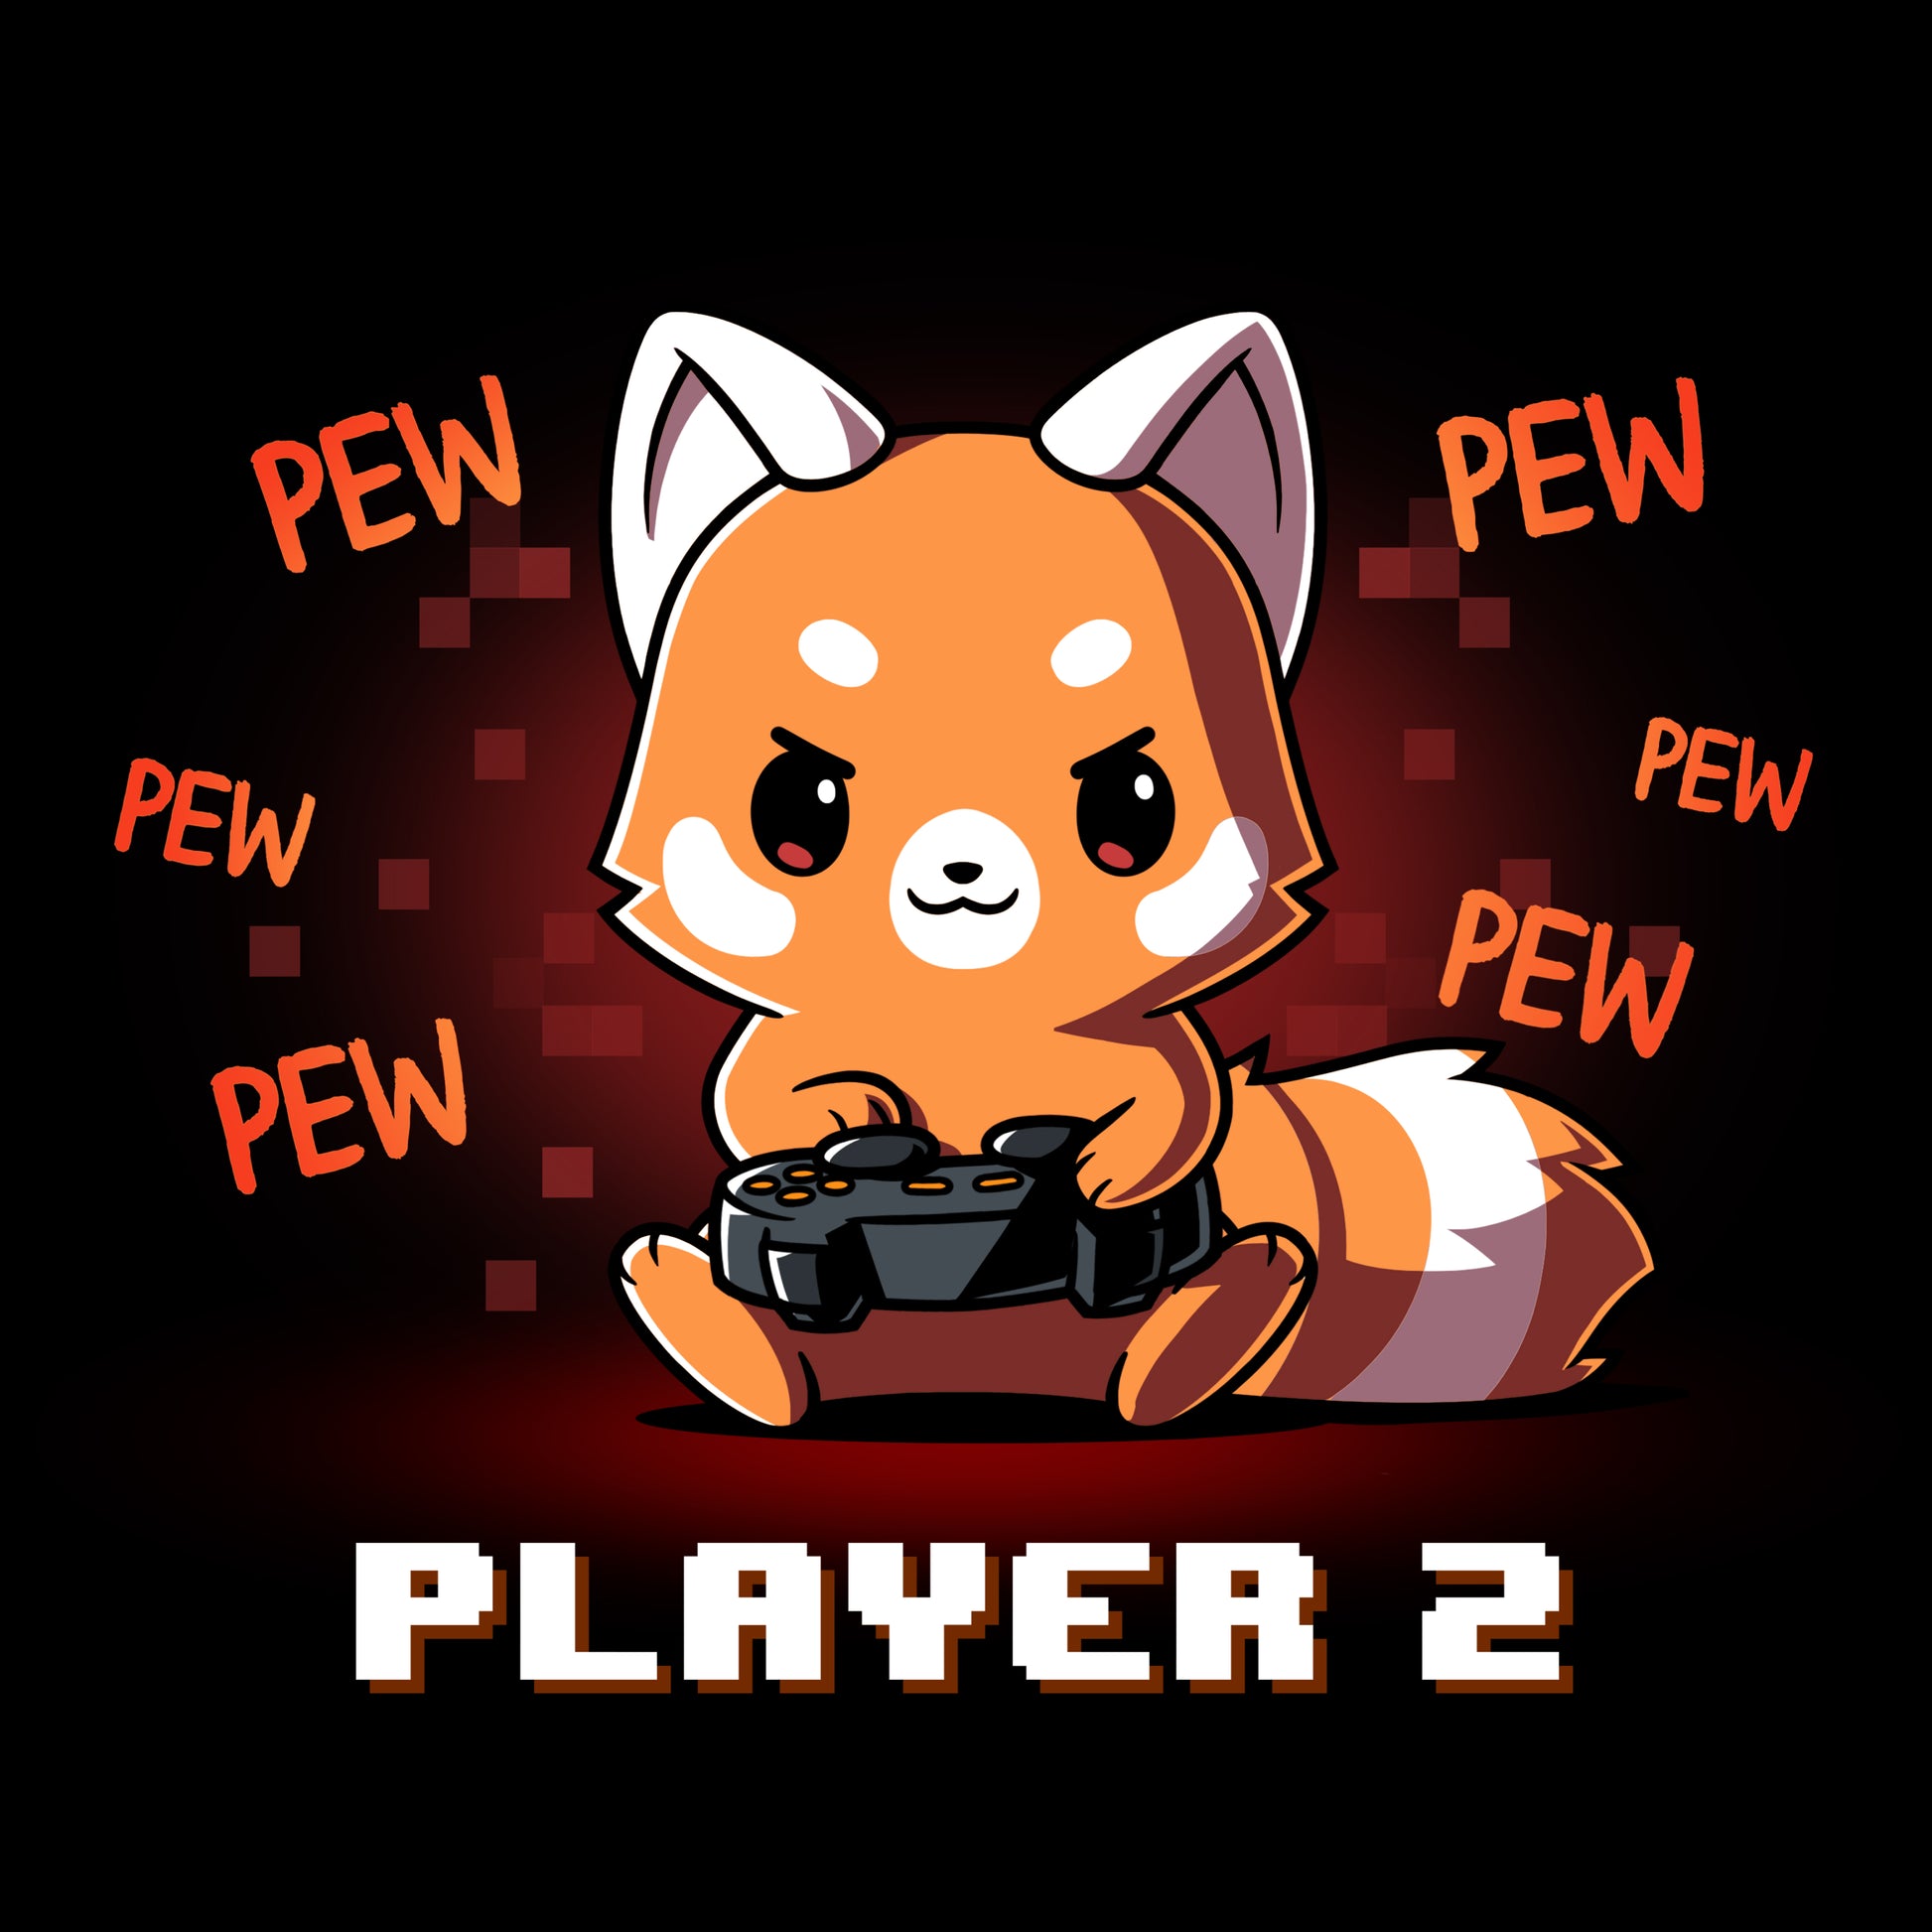 Cartoon of a cute orange fox holding a game controller with "PEW PEW PEW" written around it. The text "PLAYER 2" is at the bottom. Available on a super soft ringspun cotton, black t-shirt, perfect to match with our Player 2 Red Panda design from monsterdigital.